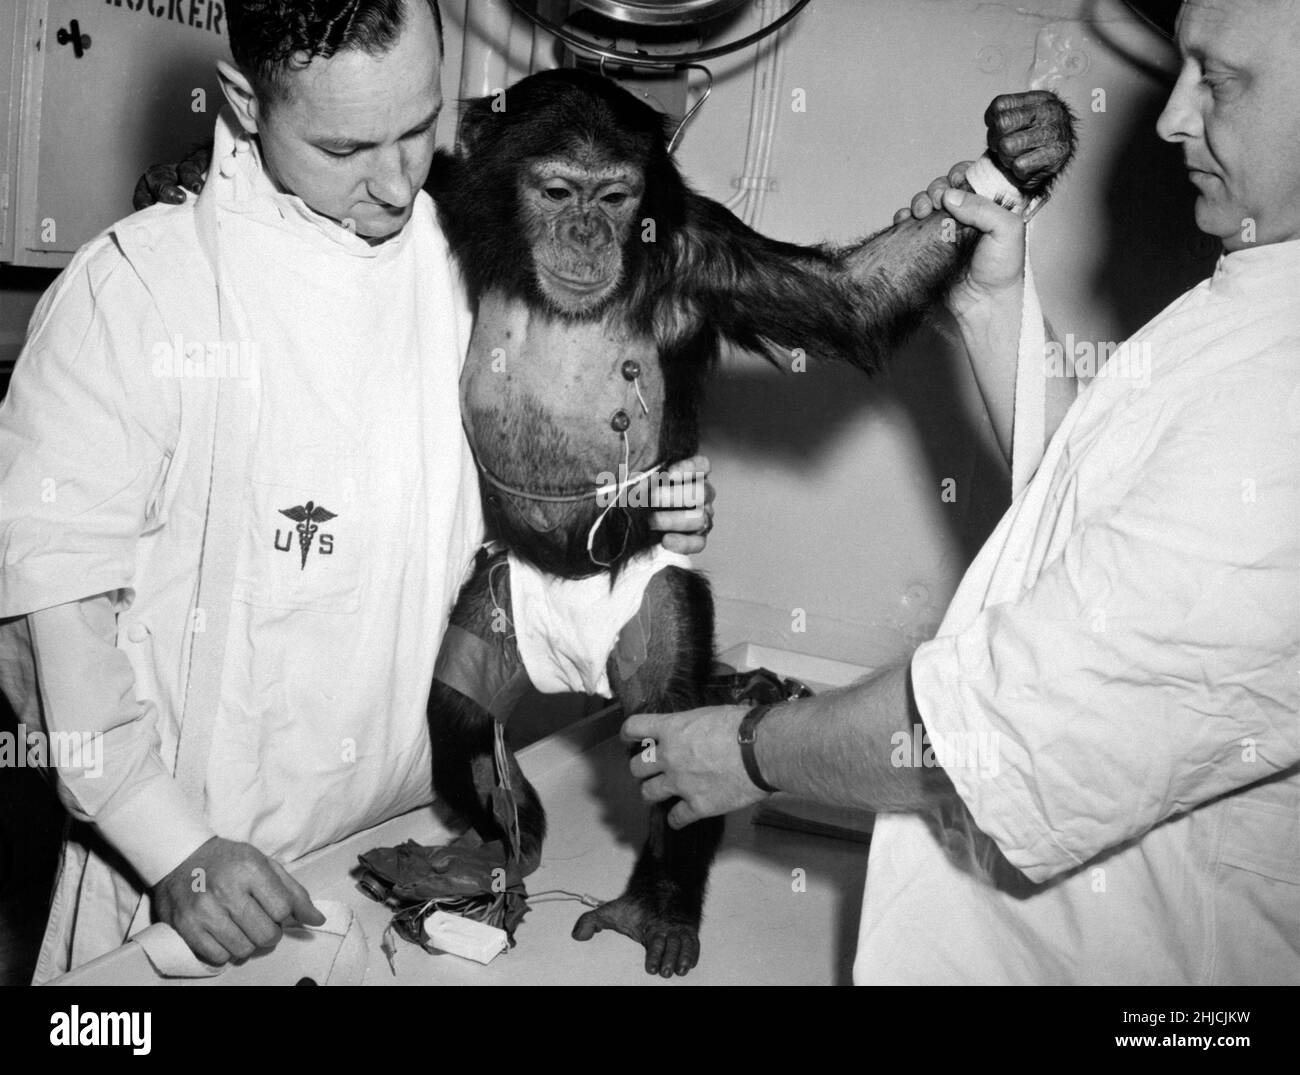 Ham the chimp with bio-sensors attached to his body is readied by handlers for his trip in the Mecury-Redstone 2 spacecraft. On January 31, 1961, a Mercury-Redstone launch from Cape Canaveral carried the chimpanzee, Ham, over 400 miles down range in an arching trajectory that reached a peak of 158 miles above the Earth. The mission was successful and Ham performed his lever-pulling task well in response to the flashing light. Stock Photo